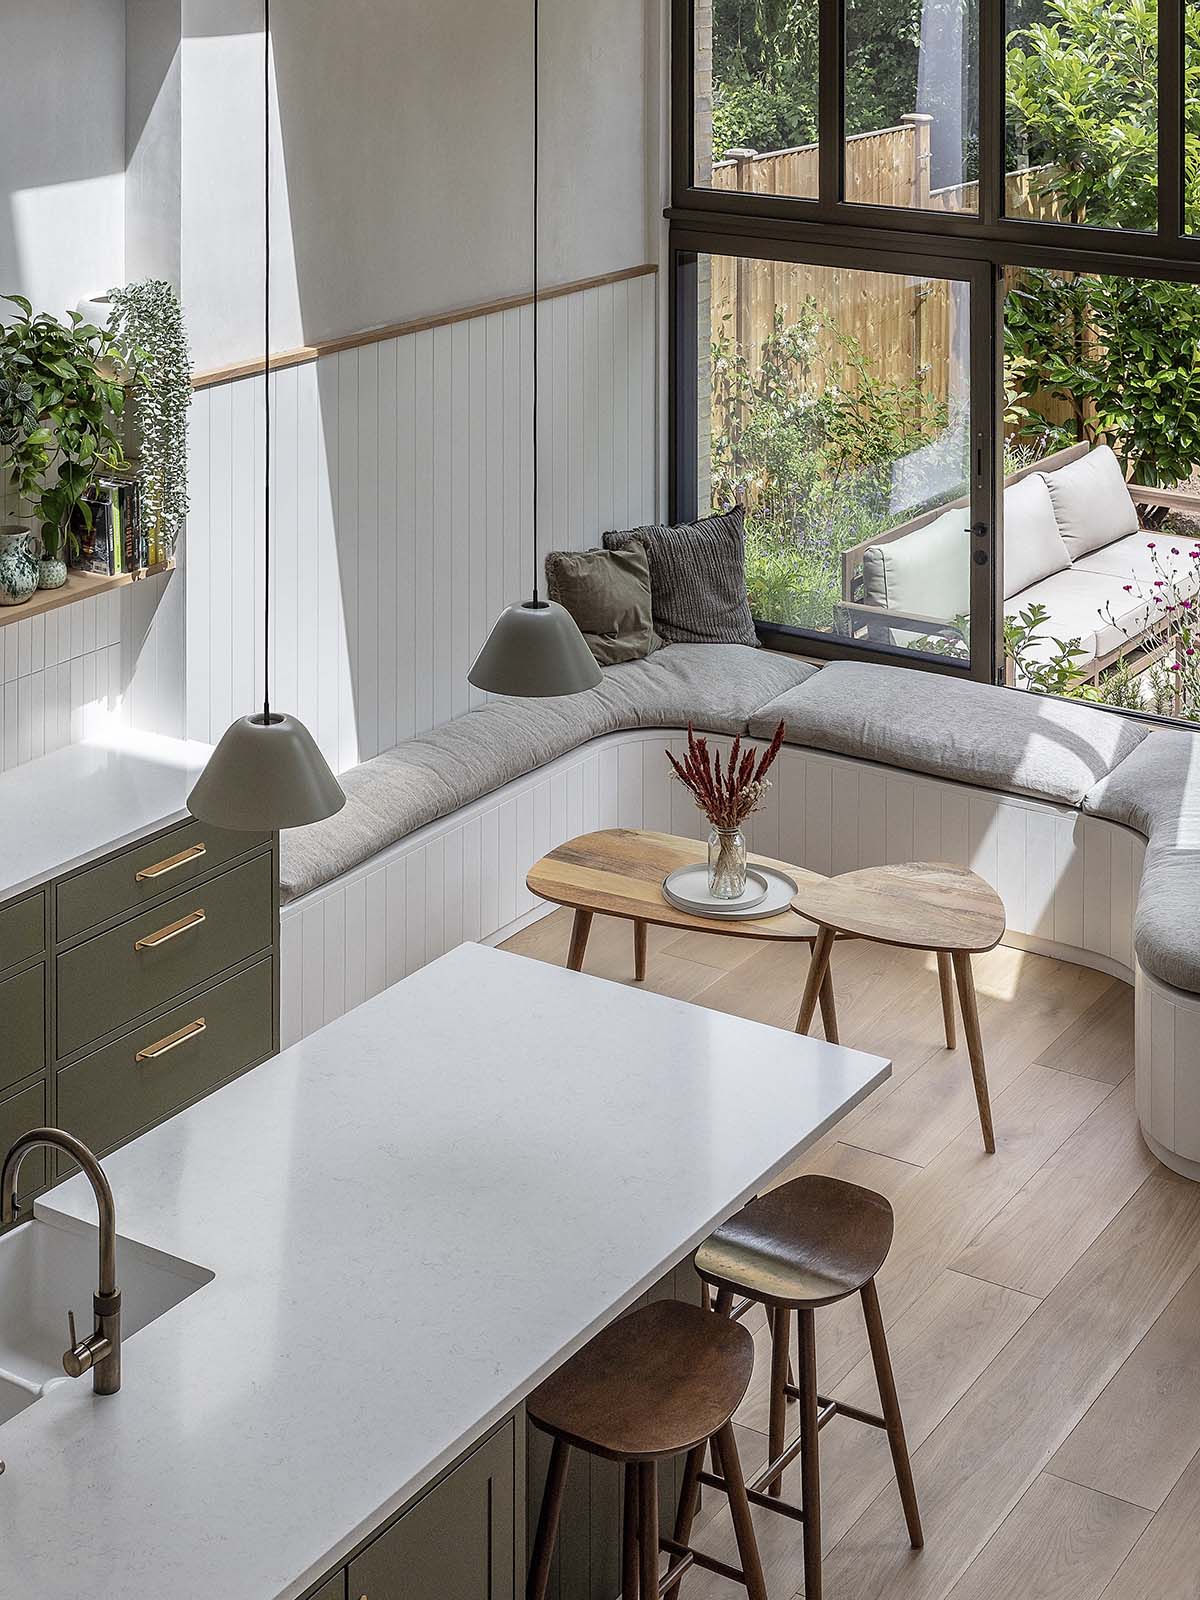 Emil Eve renovation on Talbot Road in London - pictured is the living and dining area